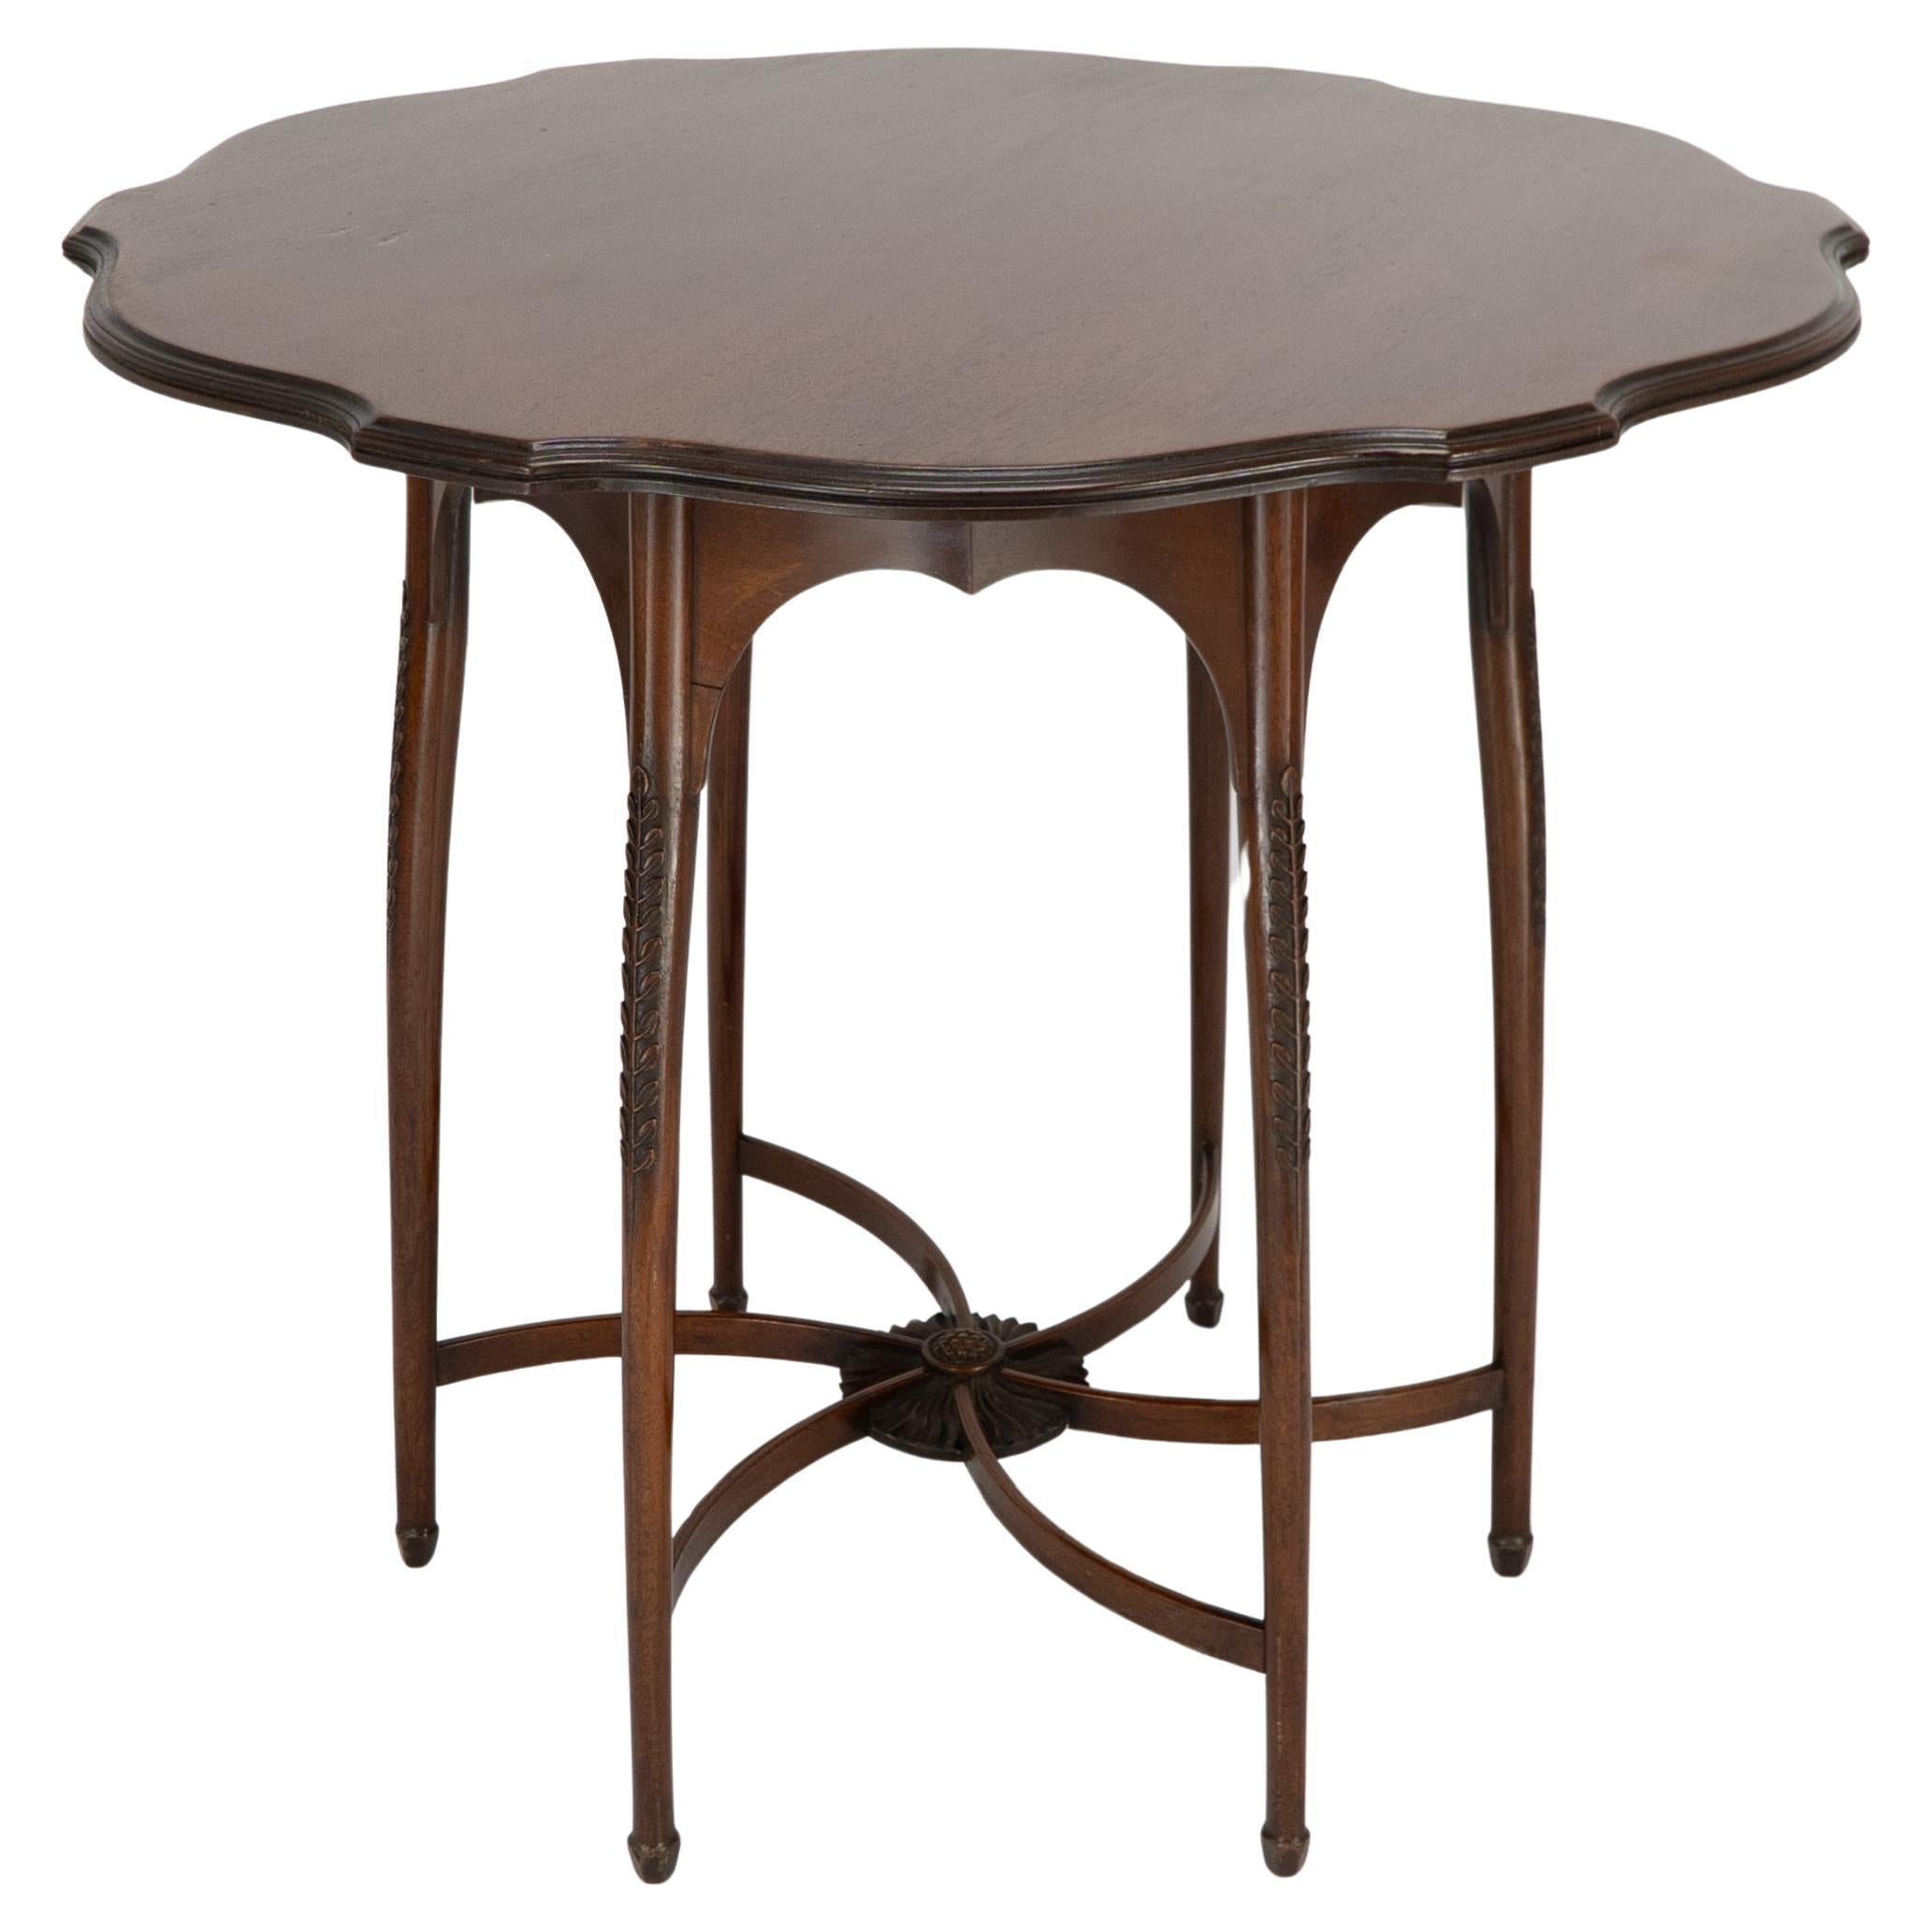 George Jack for Morris and Co. A high Aesthetic Movement circular side table For Sale